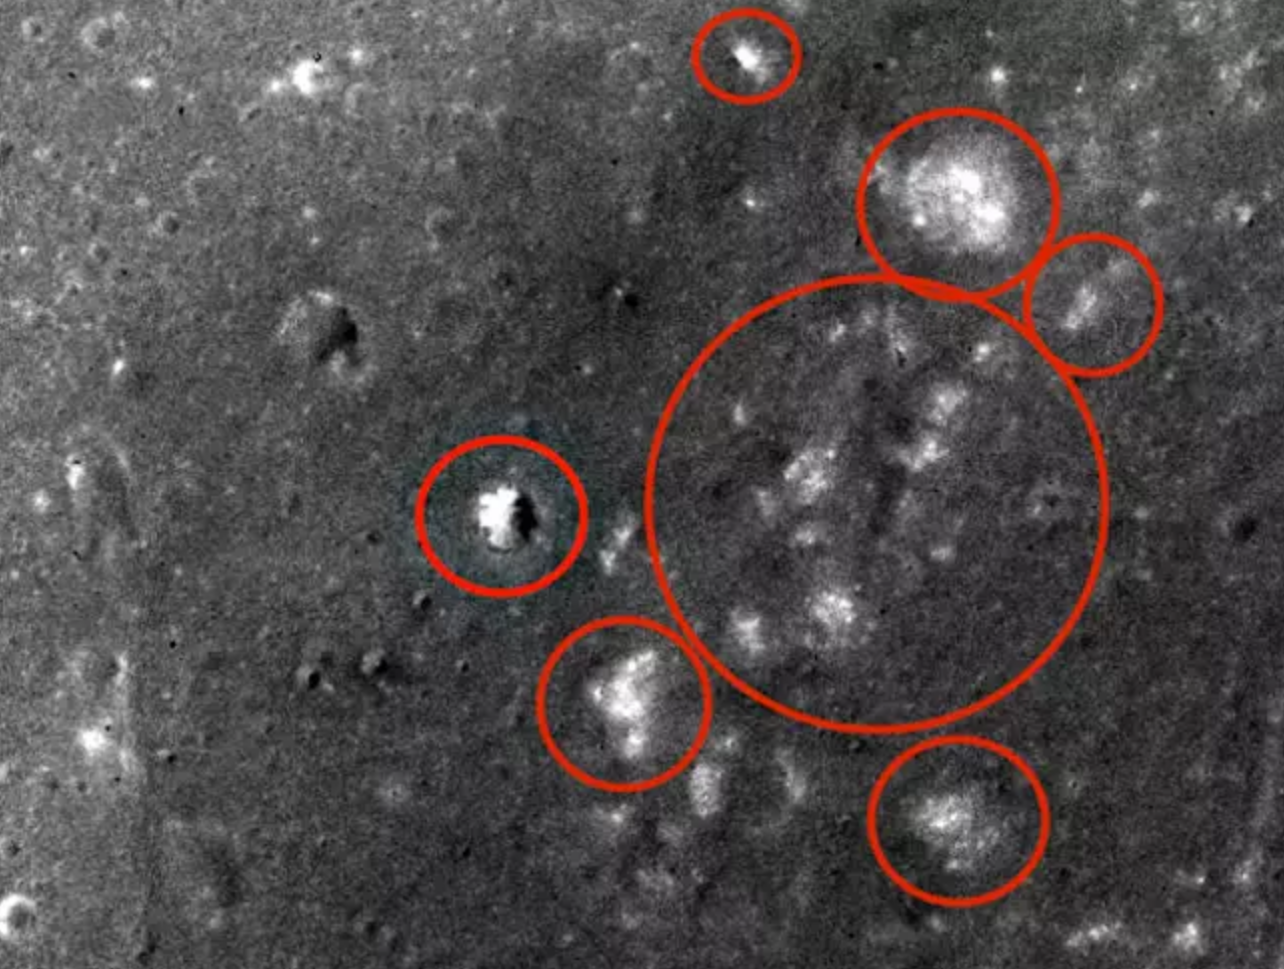 UFO expert says he has seen 100% proof of alien structures on the Moon